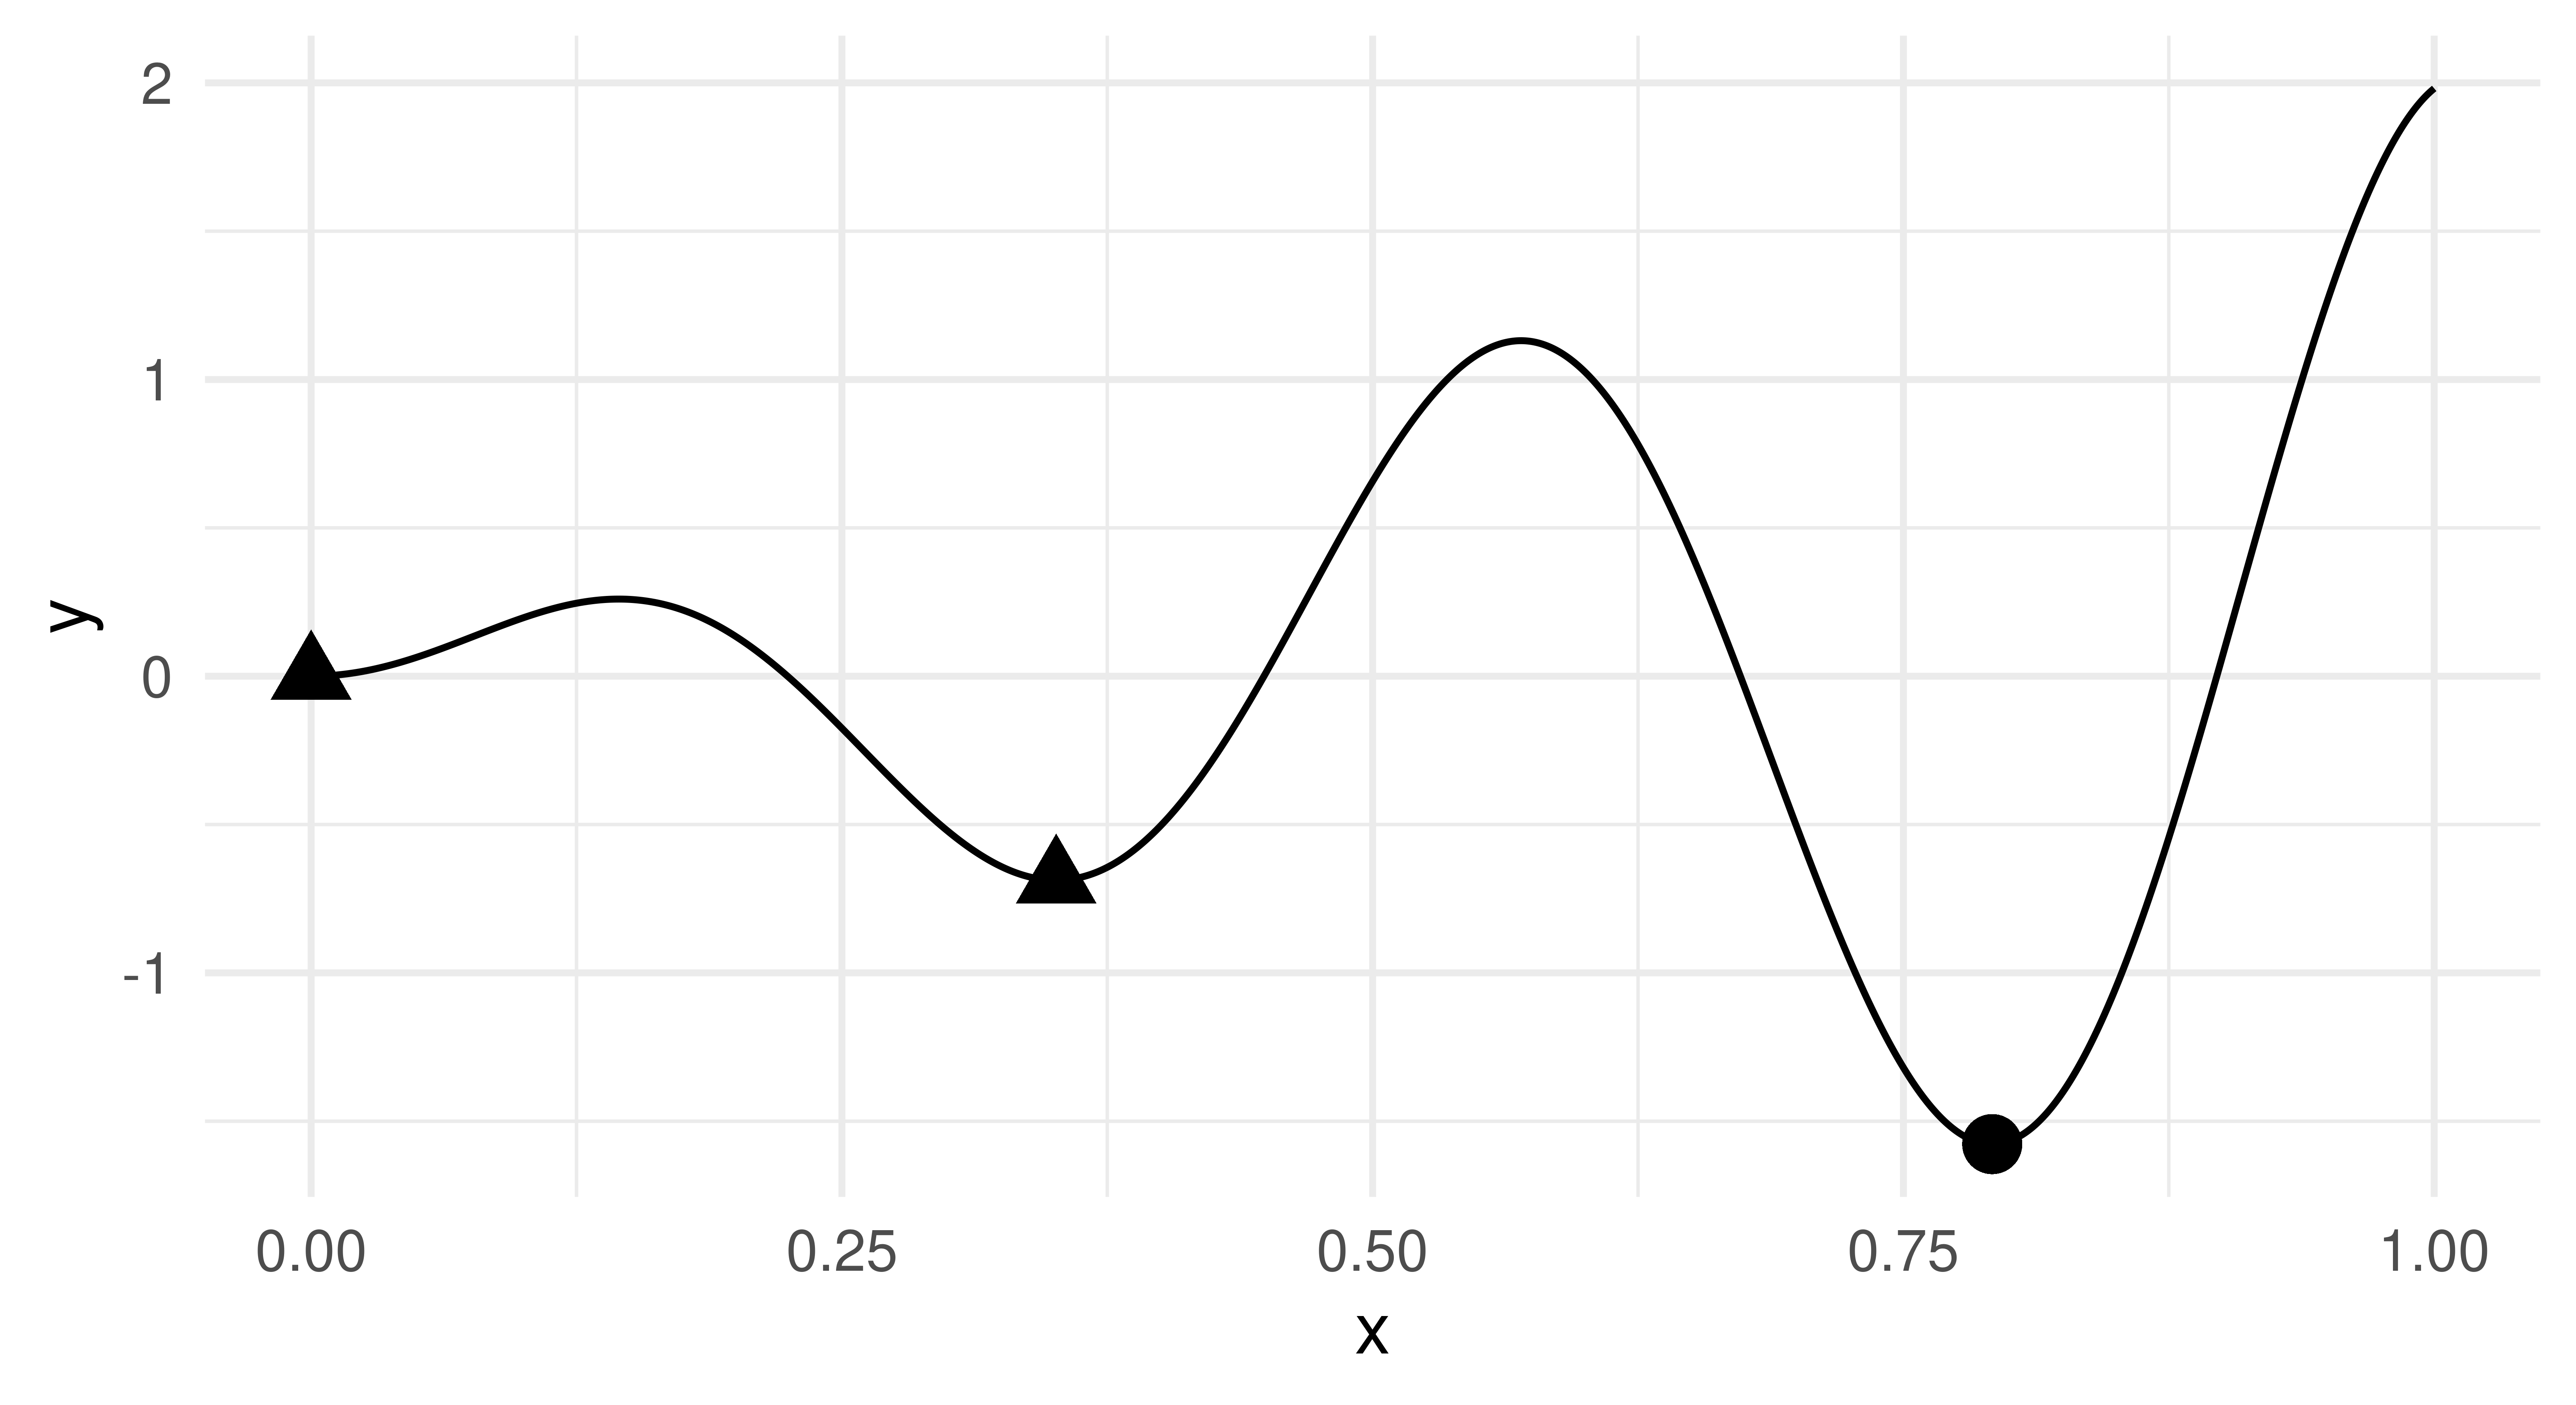 Line graph from (0,1) on the x-axis to (-2,2) on the y-axis; labelled 'x' and 'y' respectively. The line starts with a local minimum at (0,0), increases and then has a local minimum at around (0.35,-0.69), the function then increases and then decreases to the global minimum at around (0.79, -1.56).